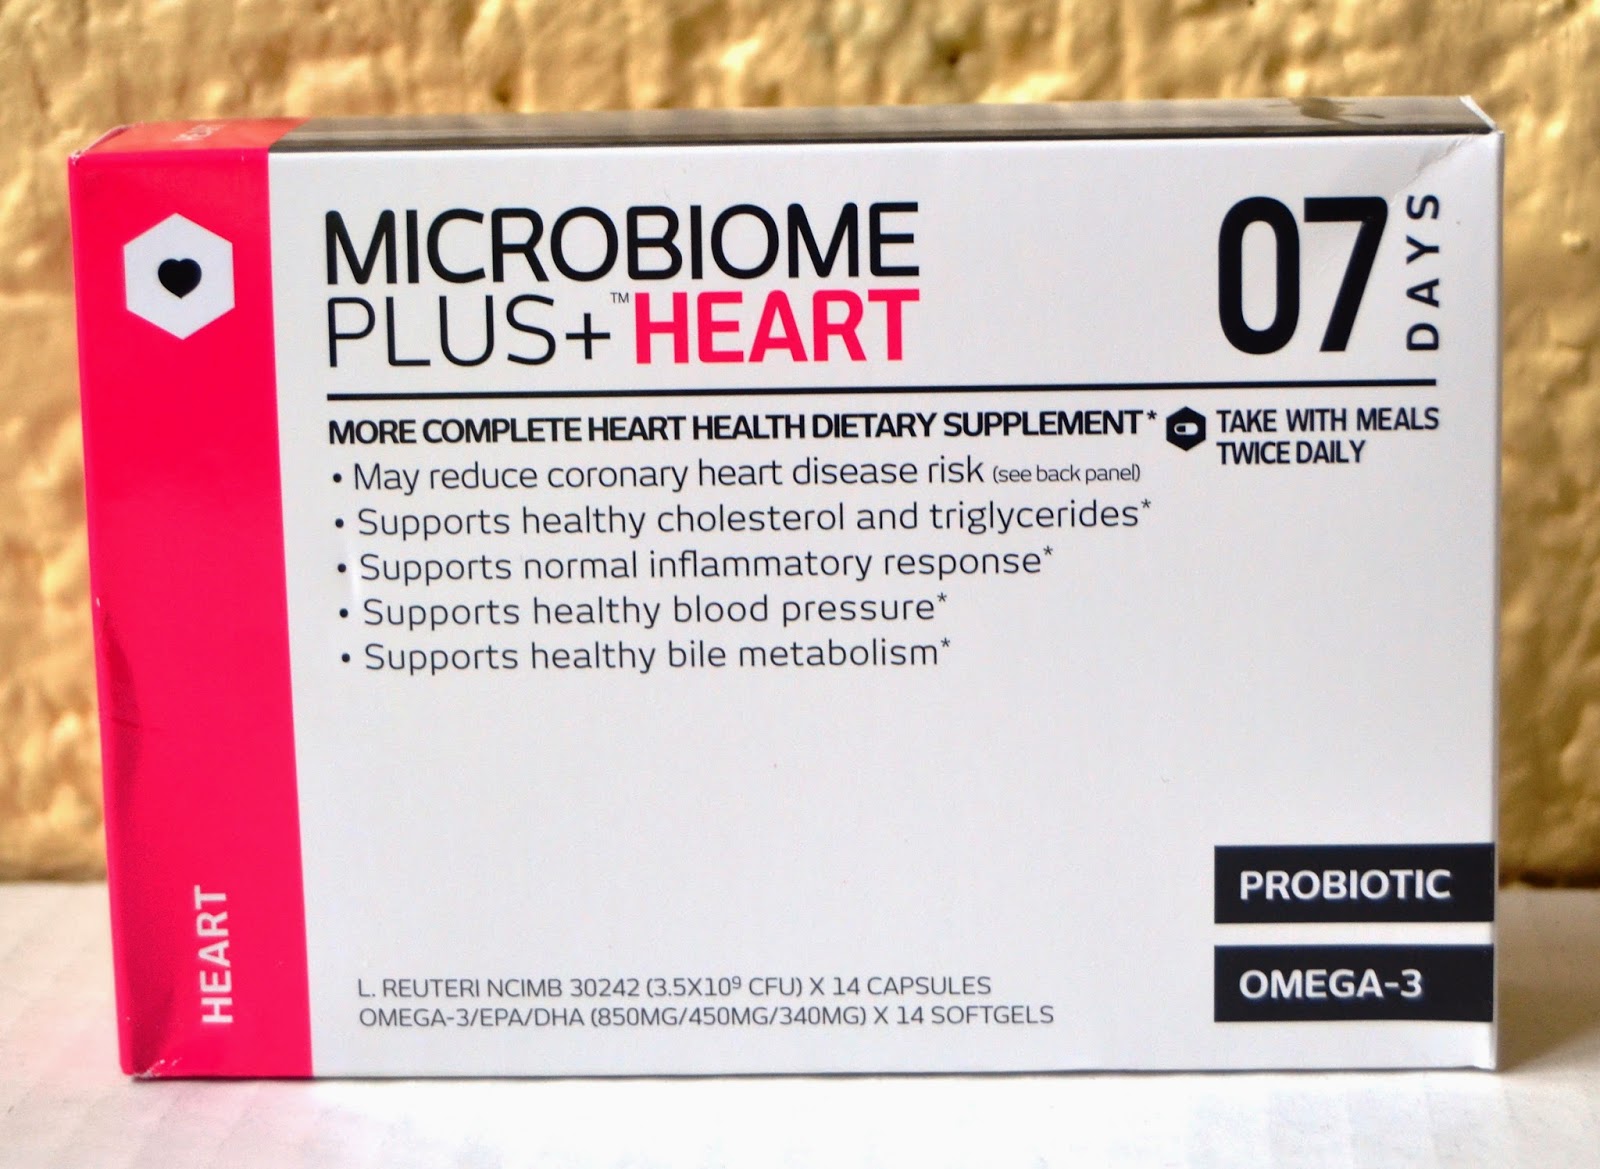 Microbiome Plus+ Heart Supplement- omega-3 and probiotics